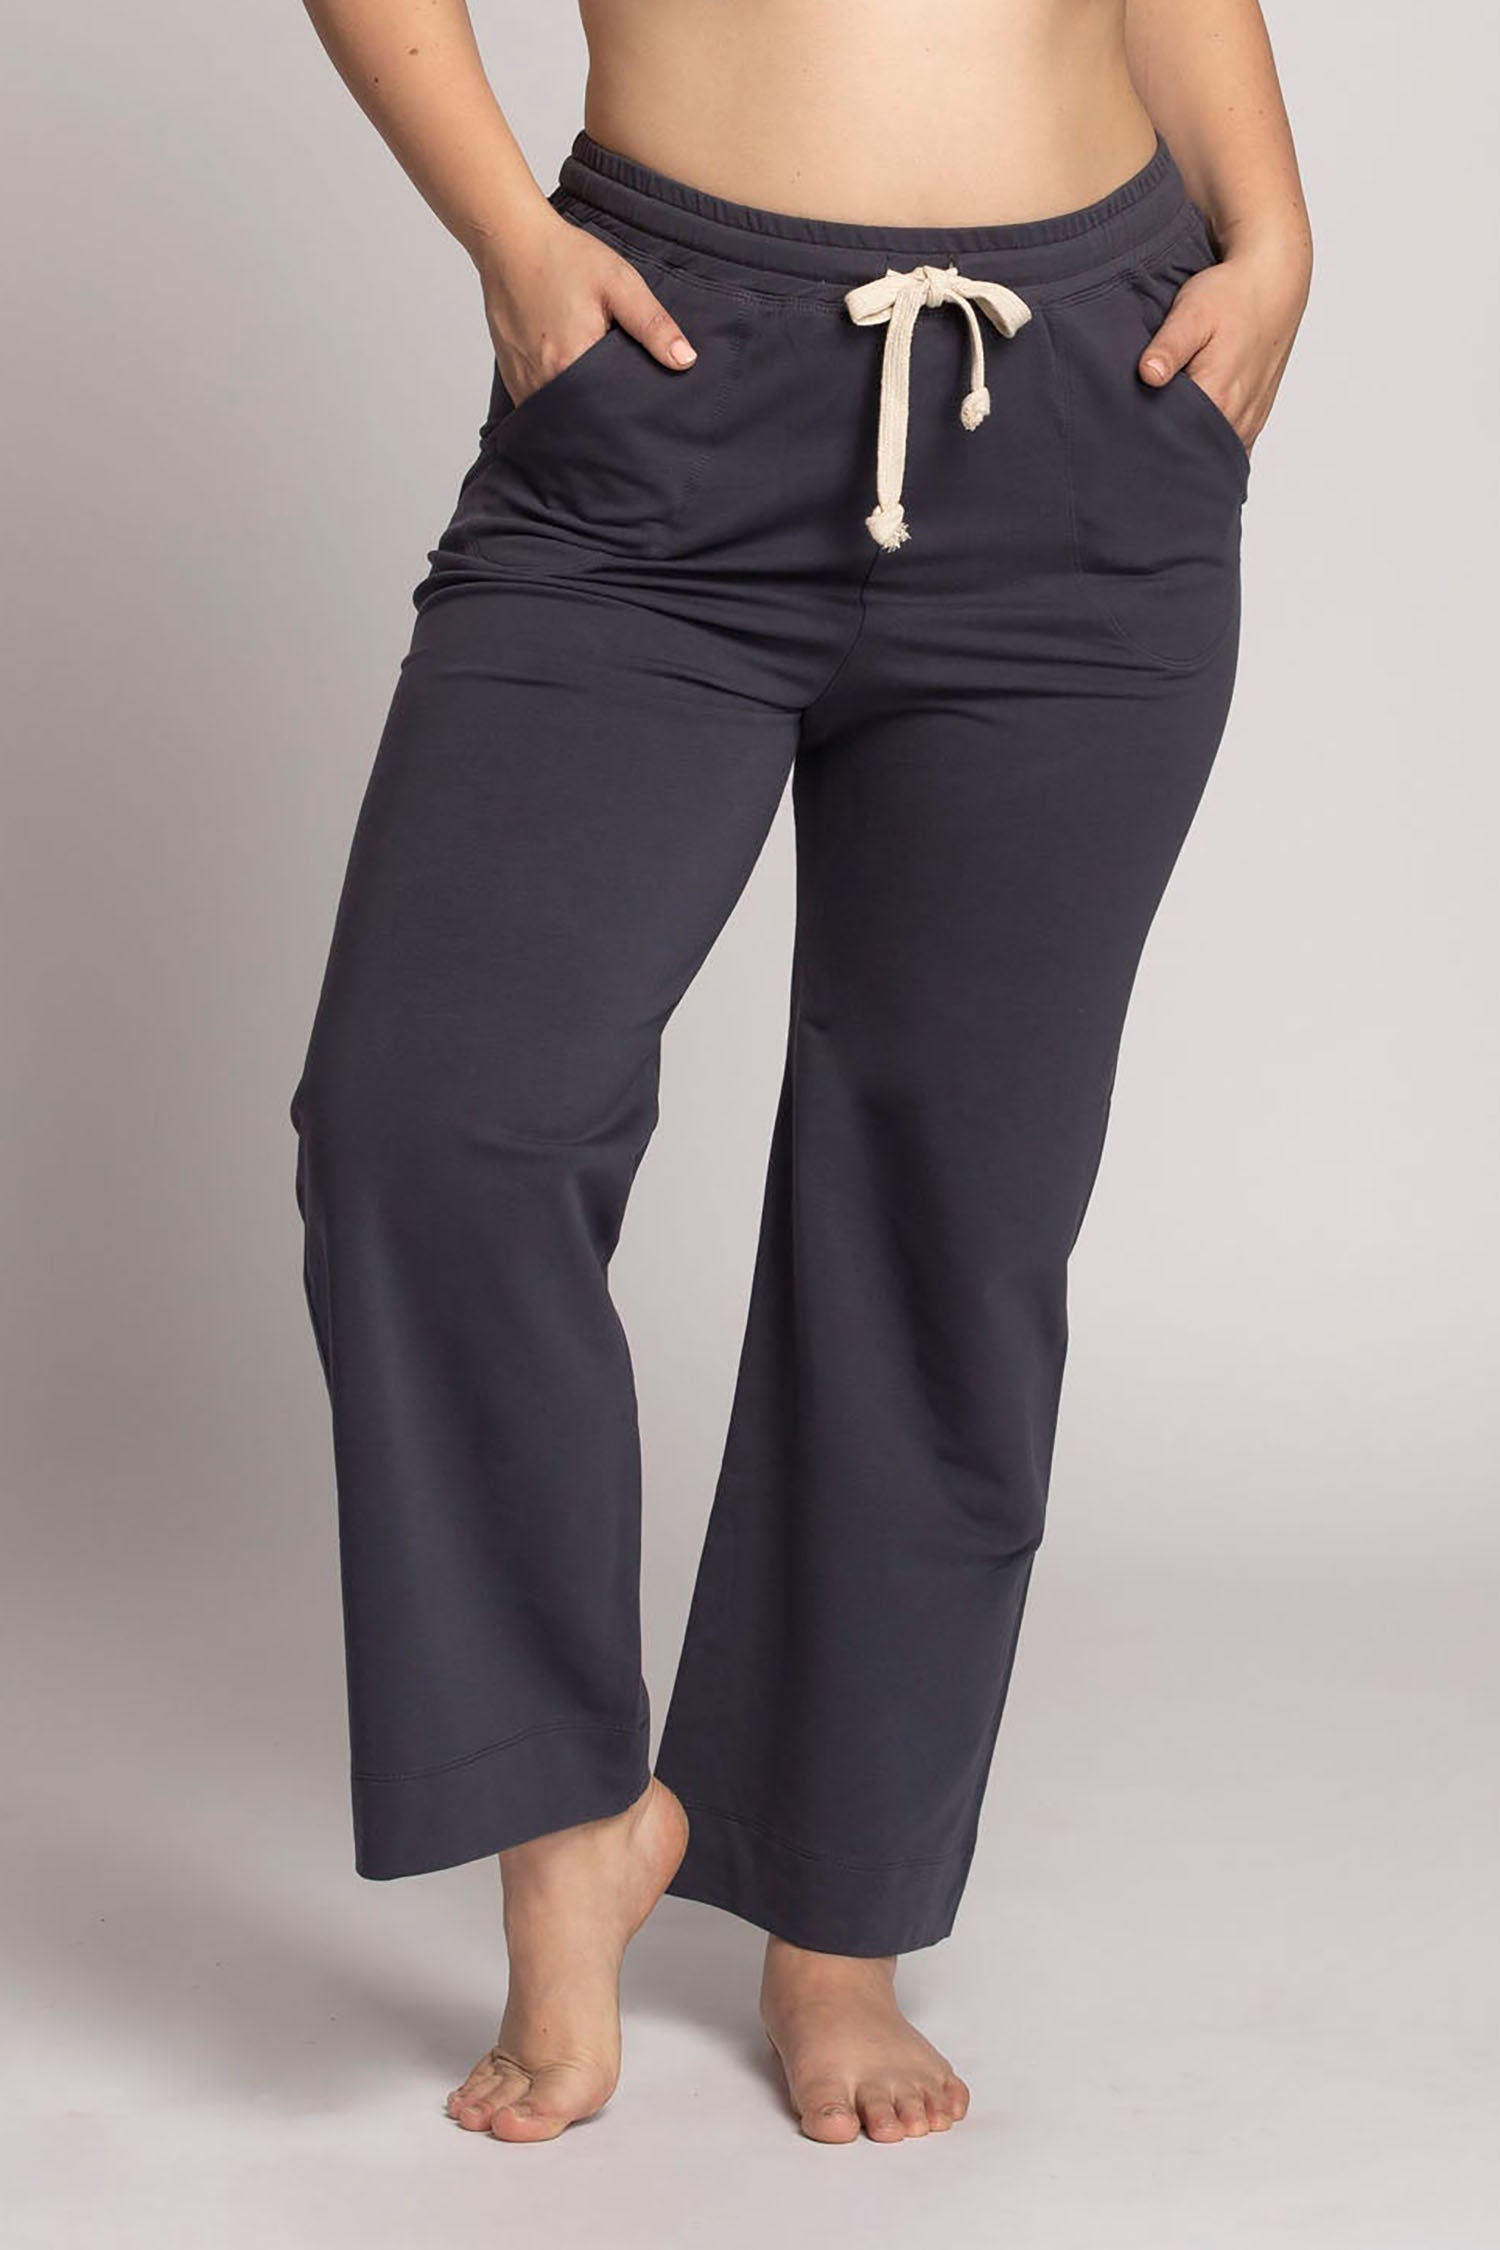 Soft Surroundings Terry Pull-On Lounge Pants Womens M Elastic